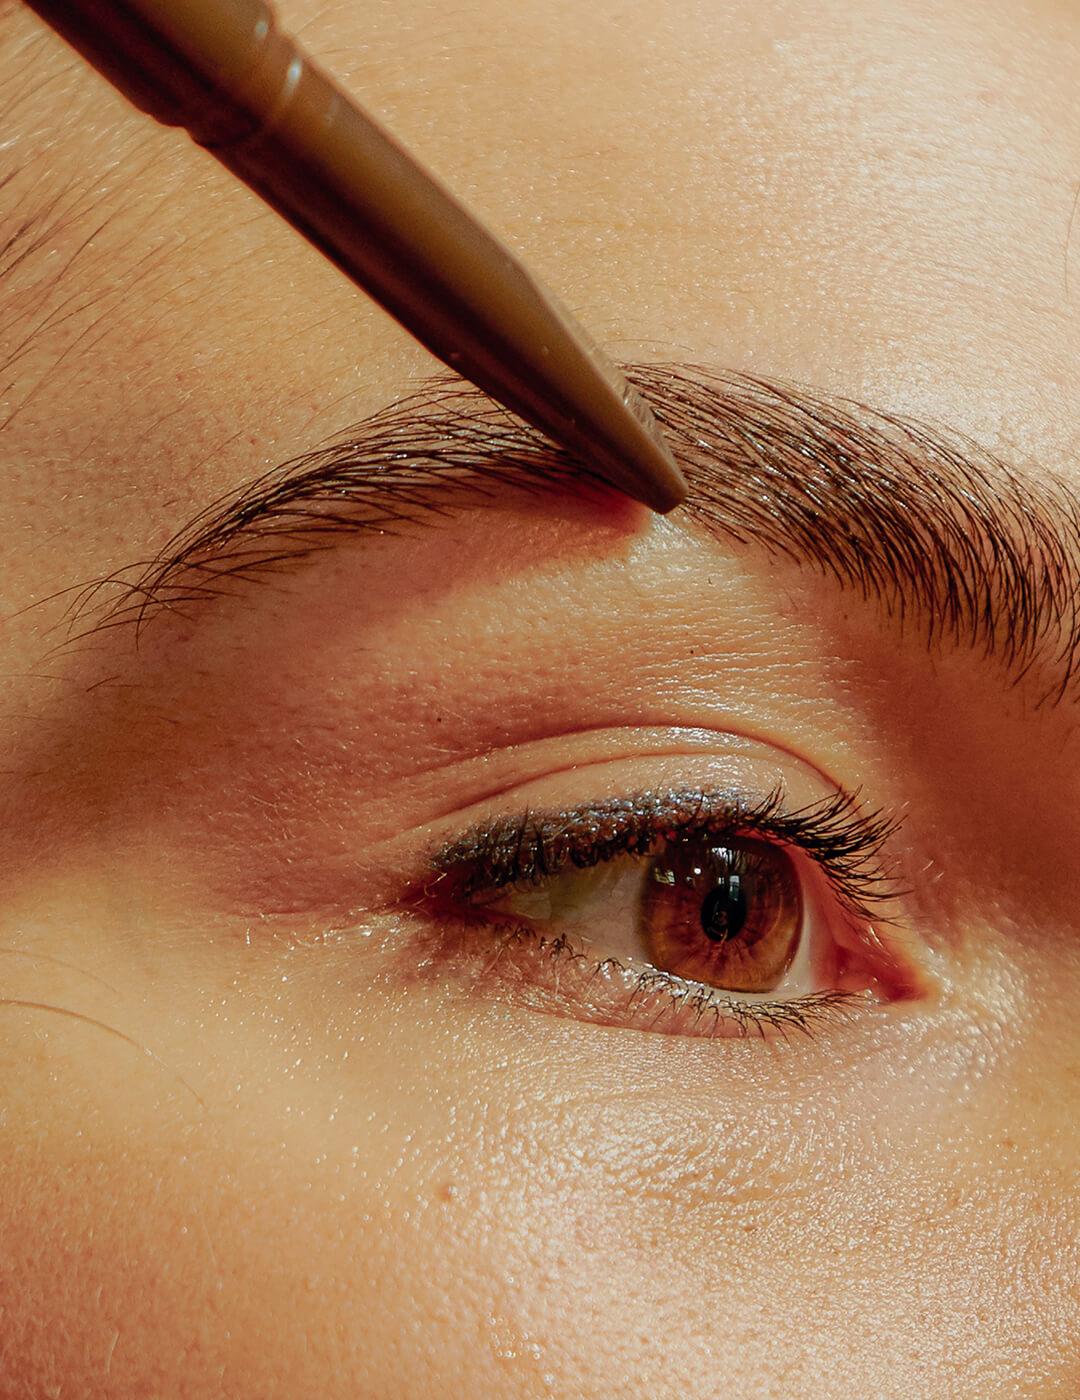 A photo of a woman's eye with a brown brow pencil on her eyebrow